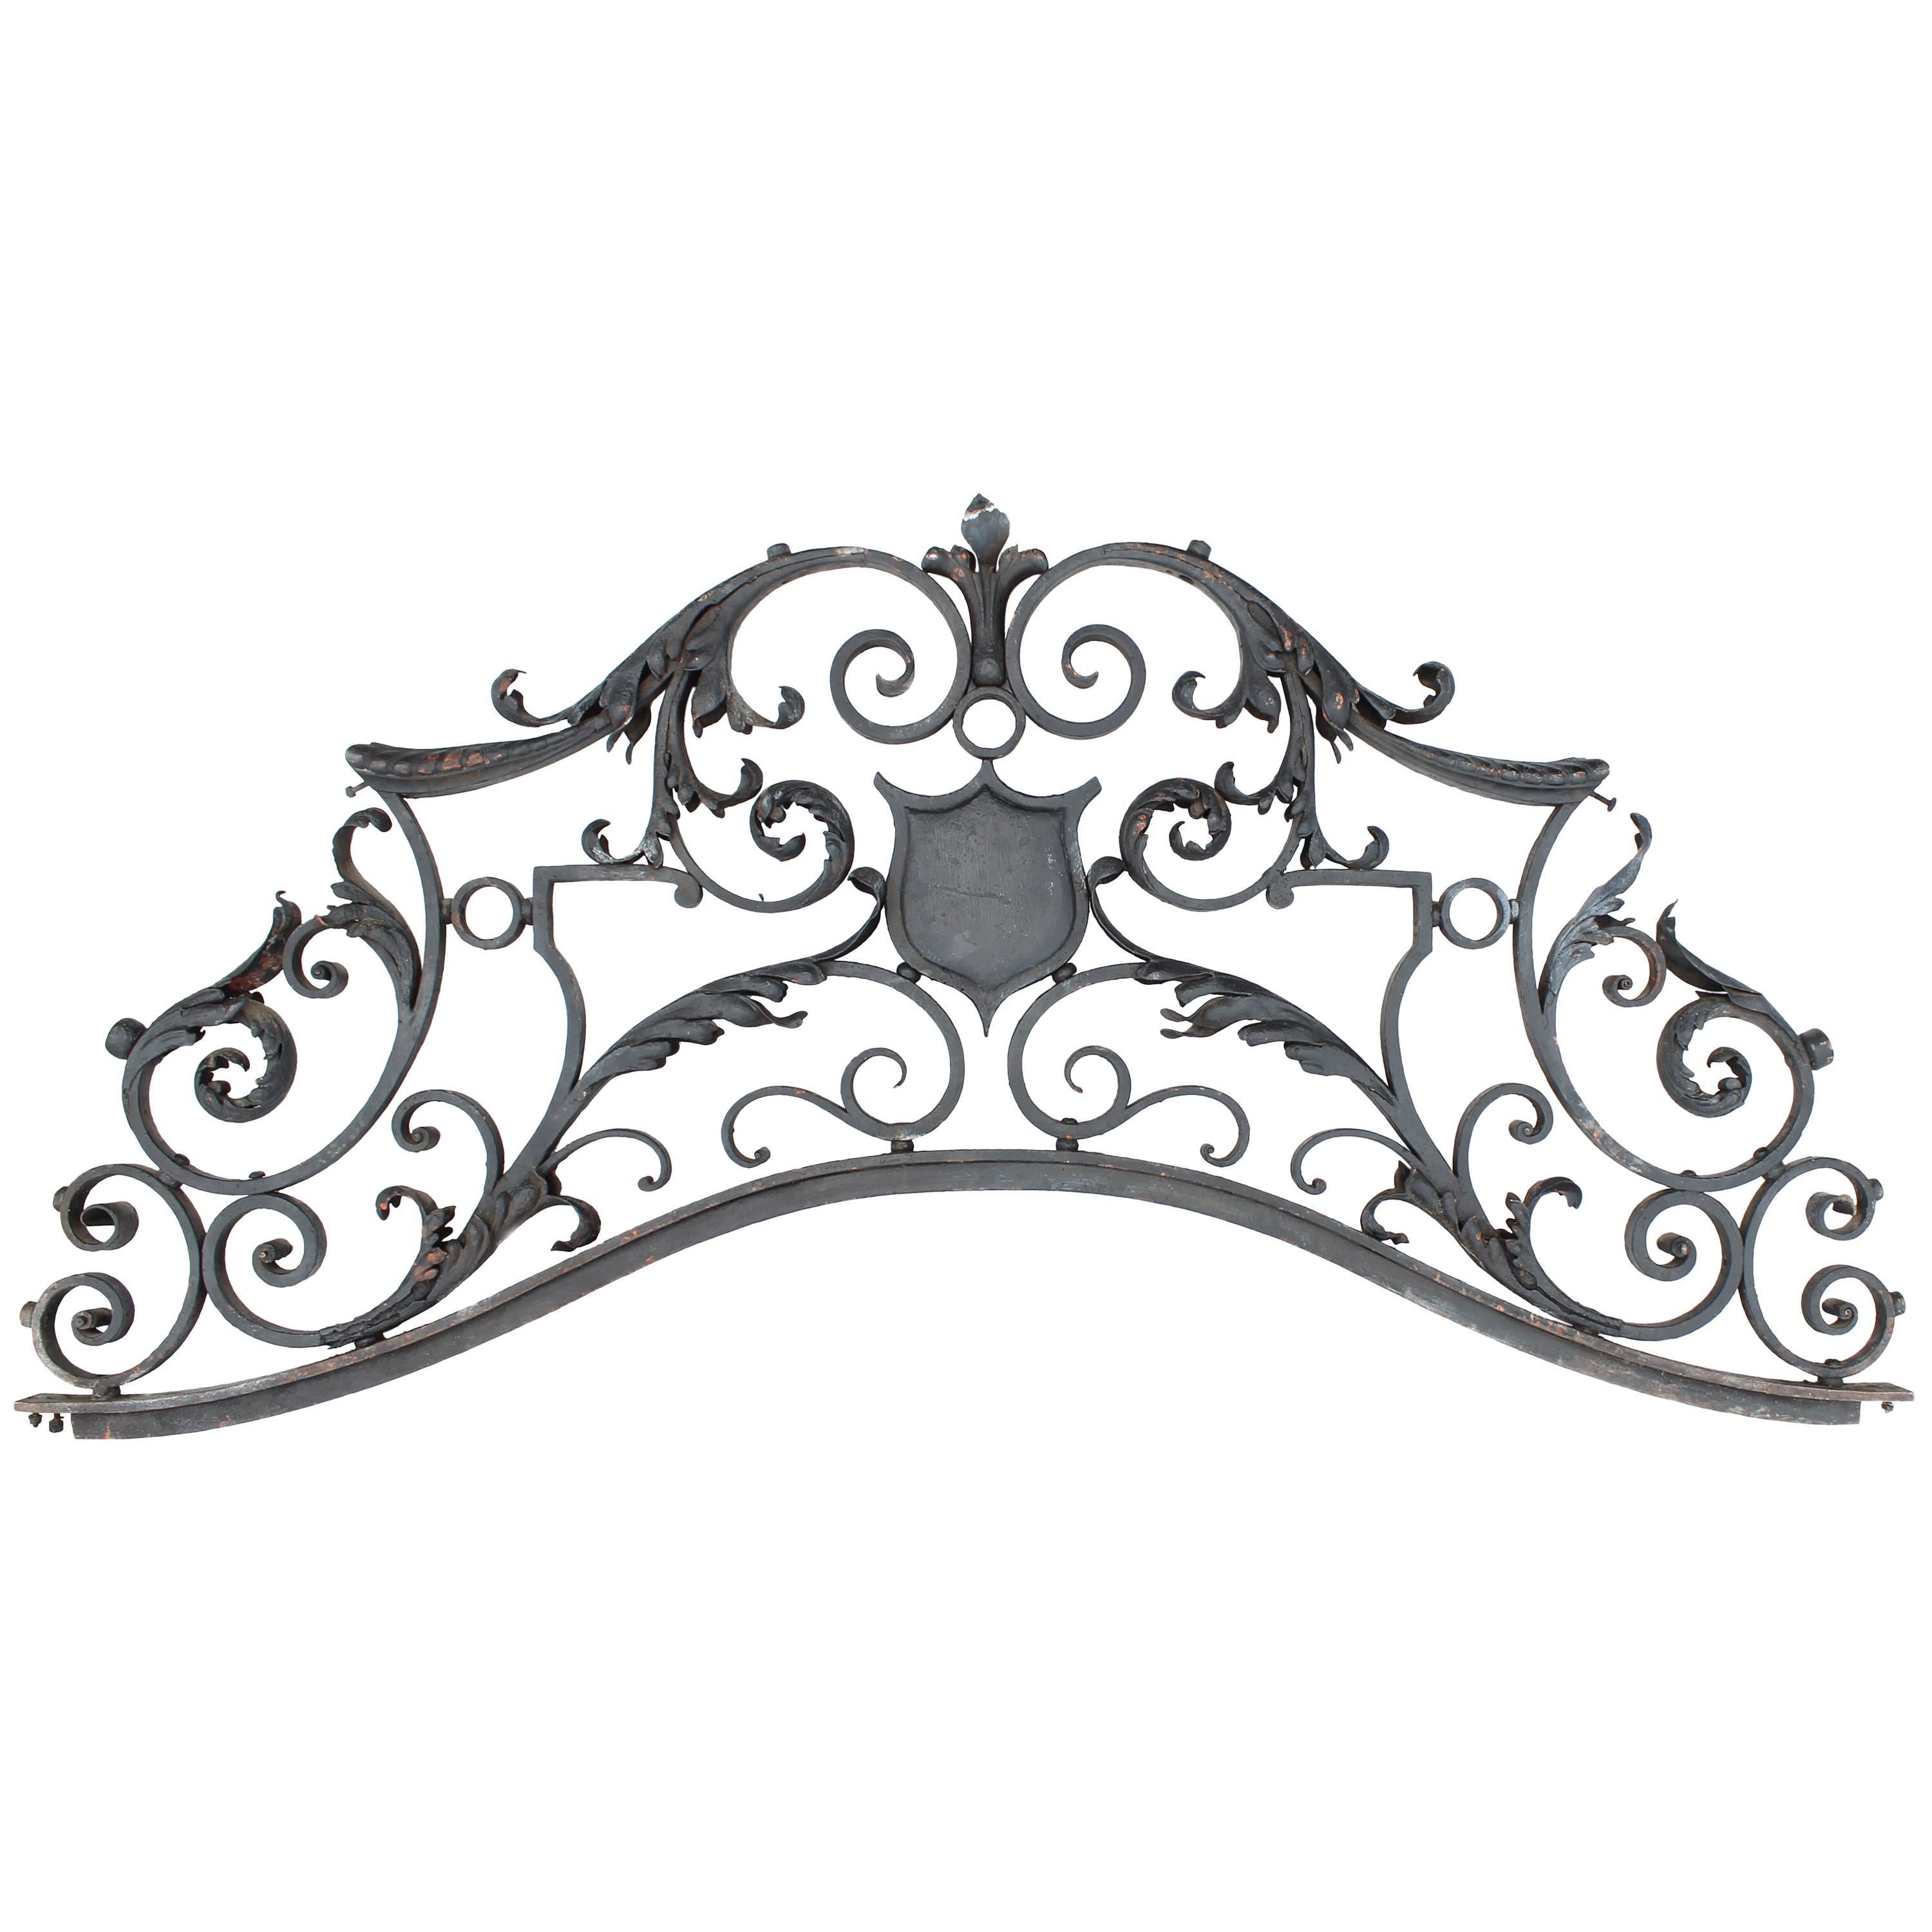 Ornate Late Victorian Iron Fence Header